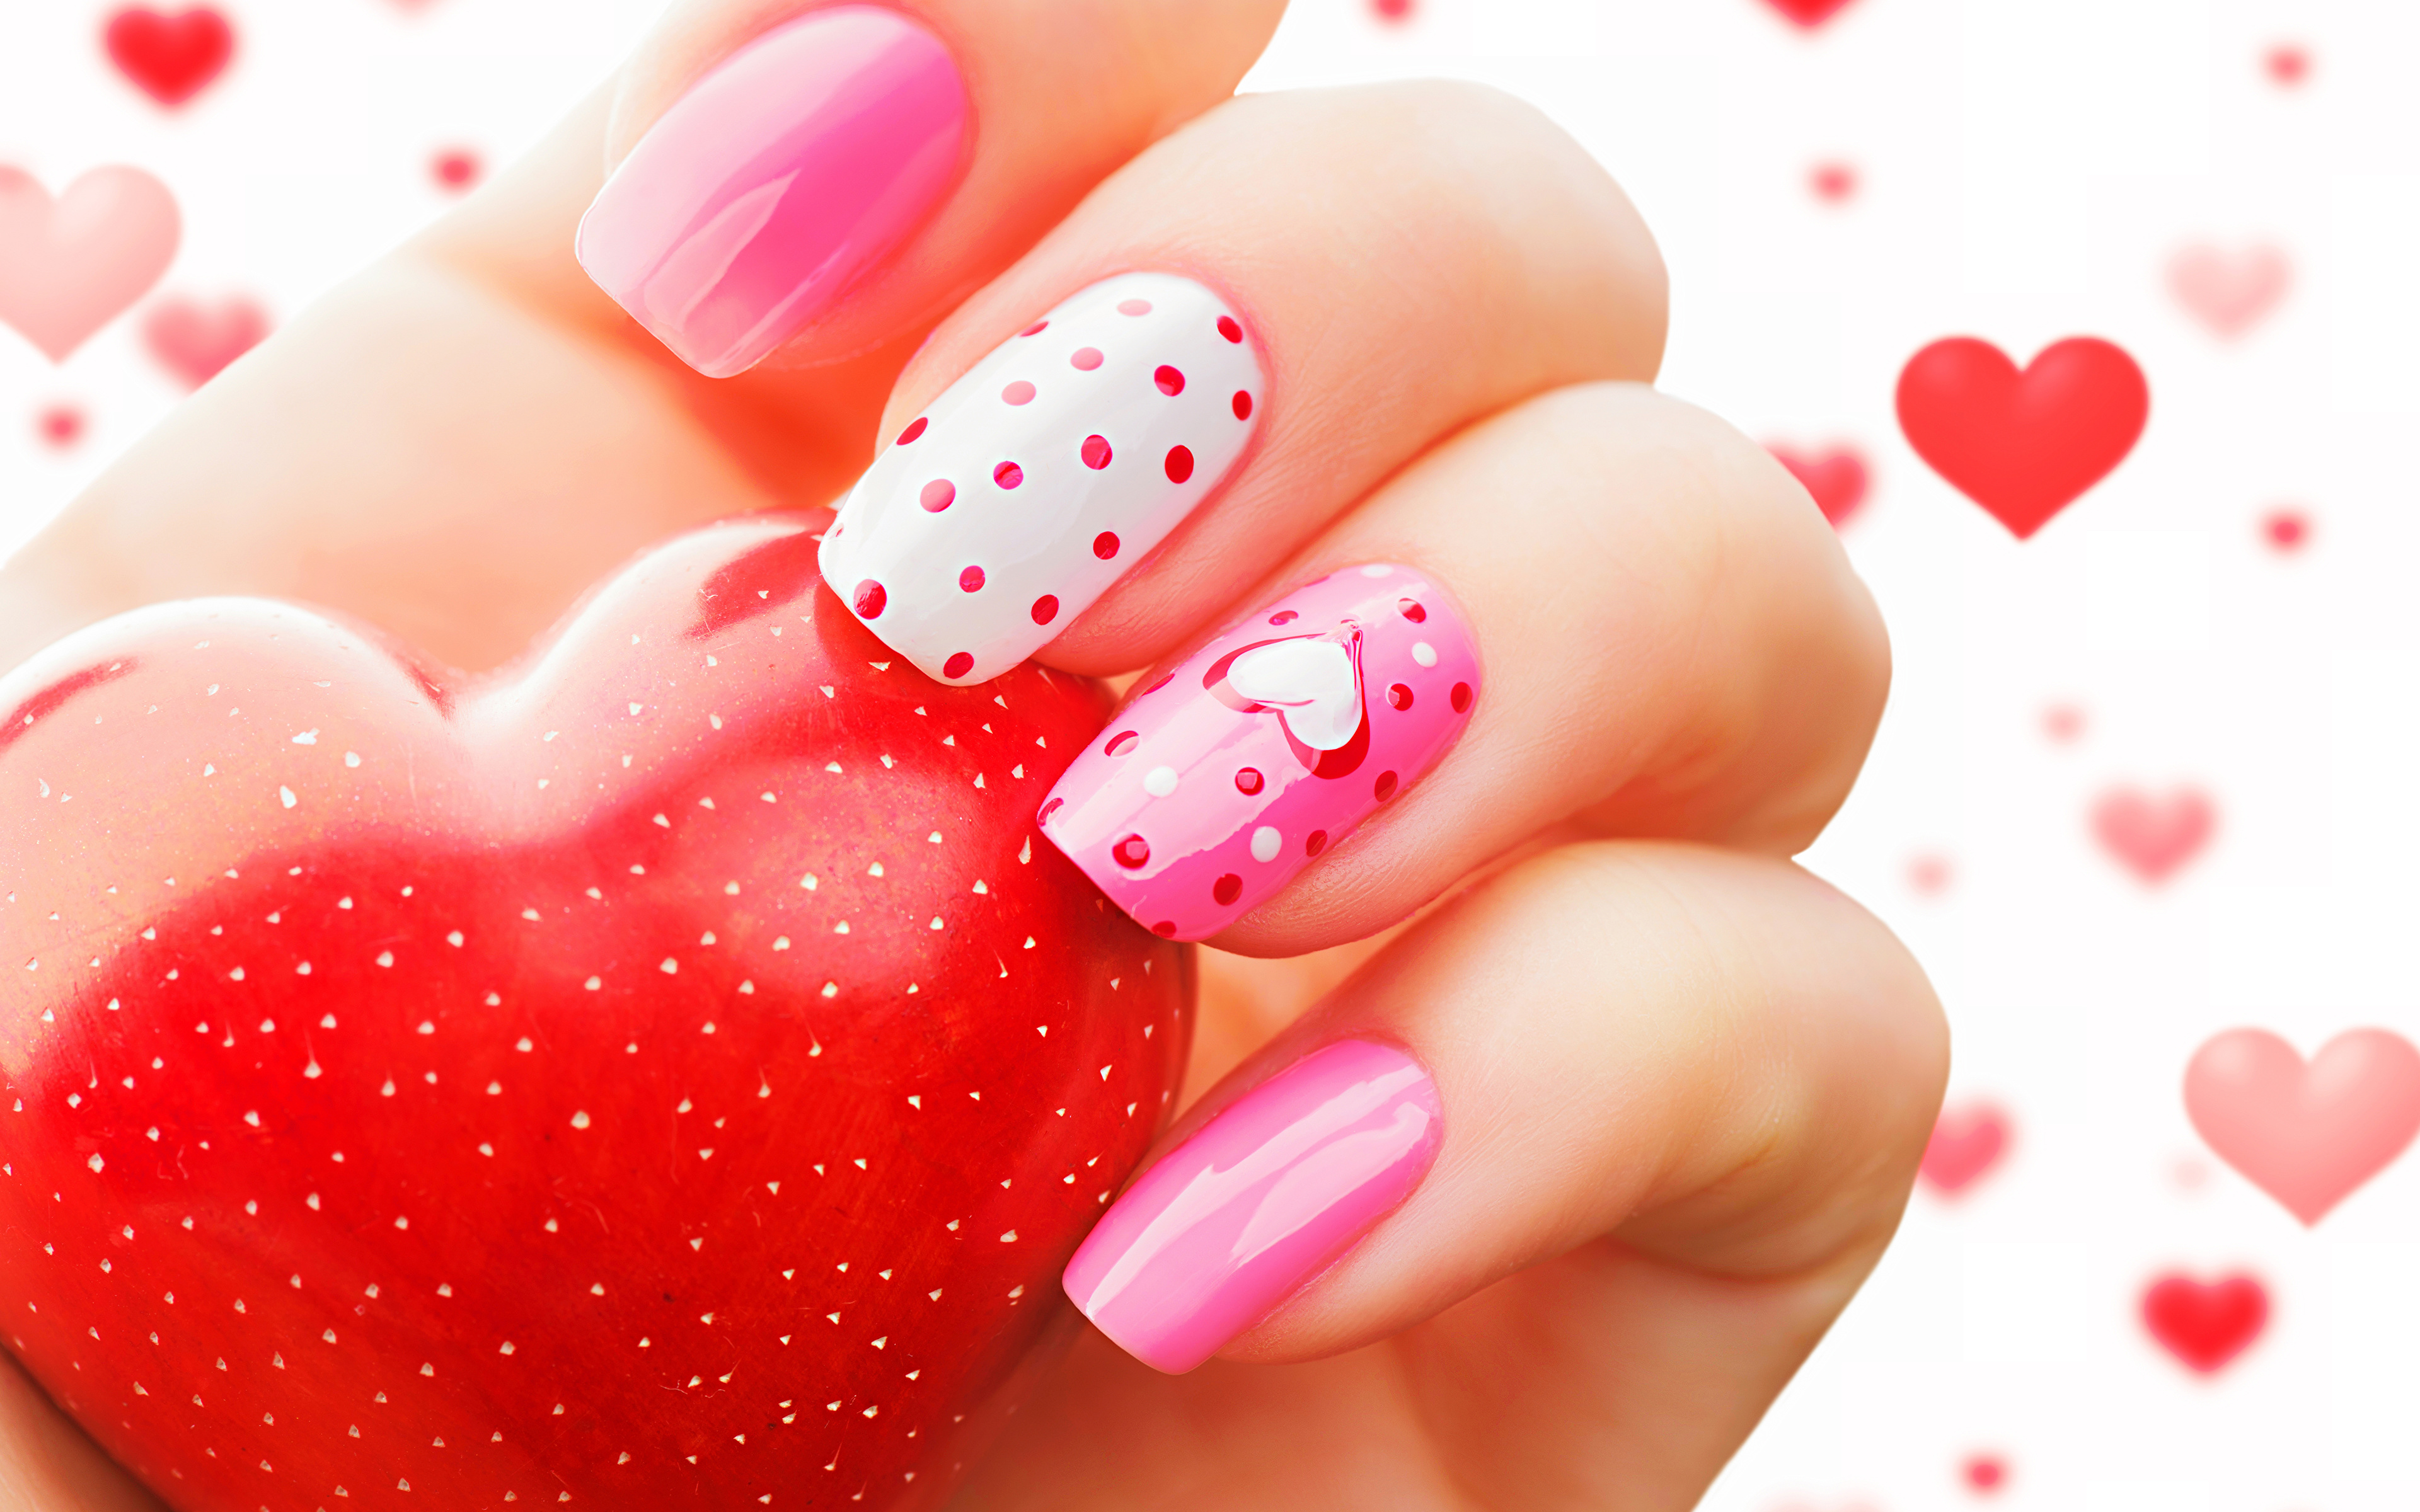 Manicure Decoration Android Free Download Background, Manicure Nails  Pictures, Manicure, Beauty Background Image And Wallpaper for Free Download